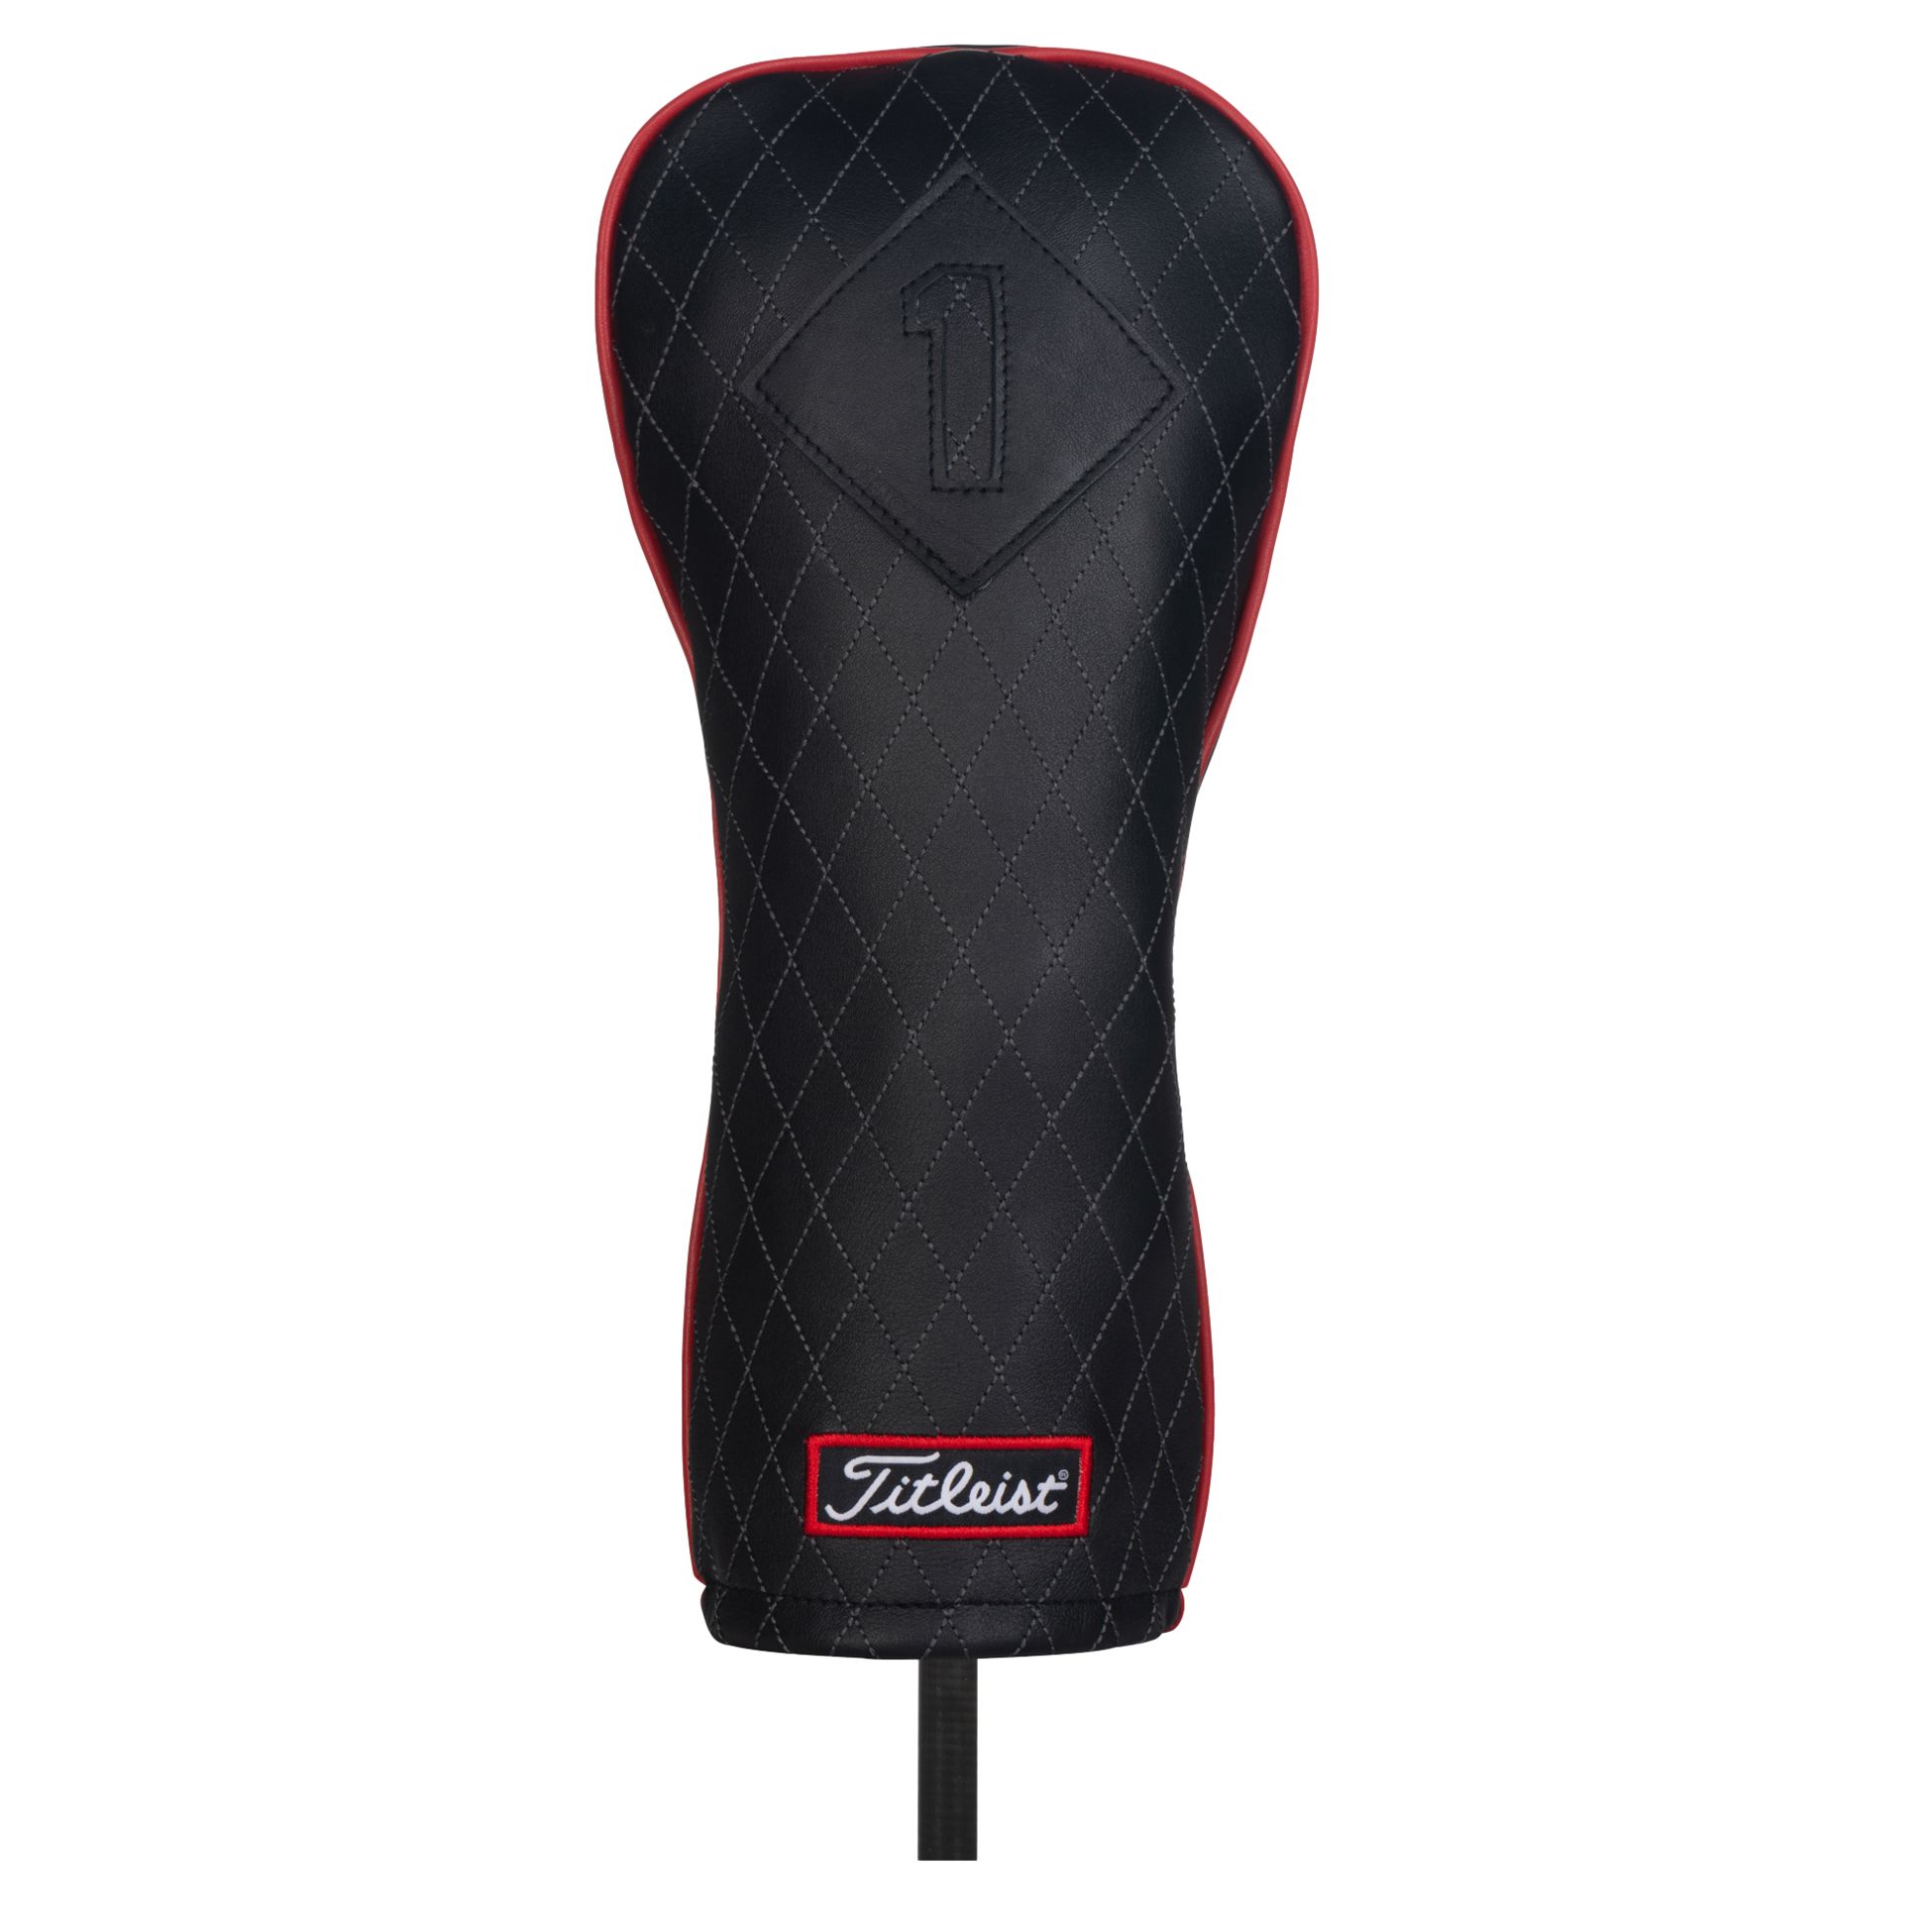 TITLEIST, JET BLACK LEATHER HEADCOVER DRIVER